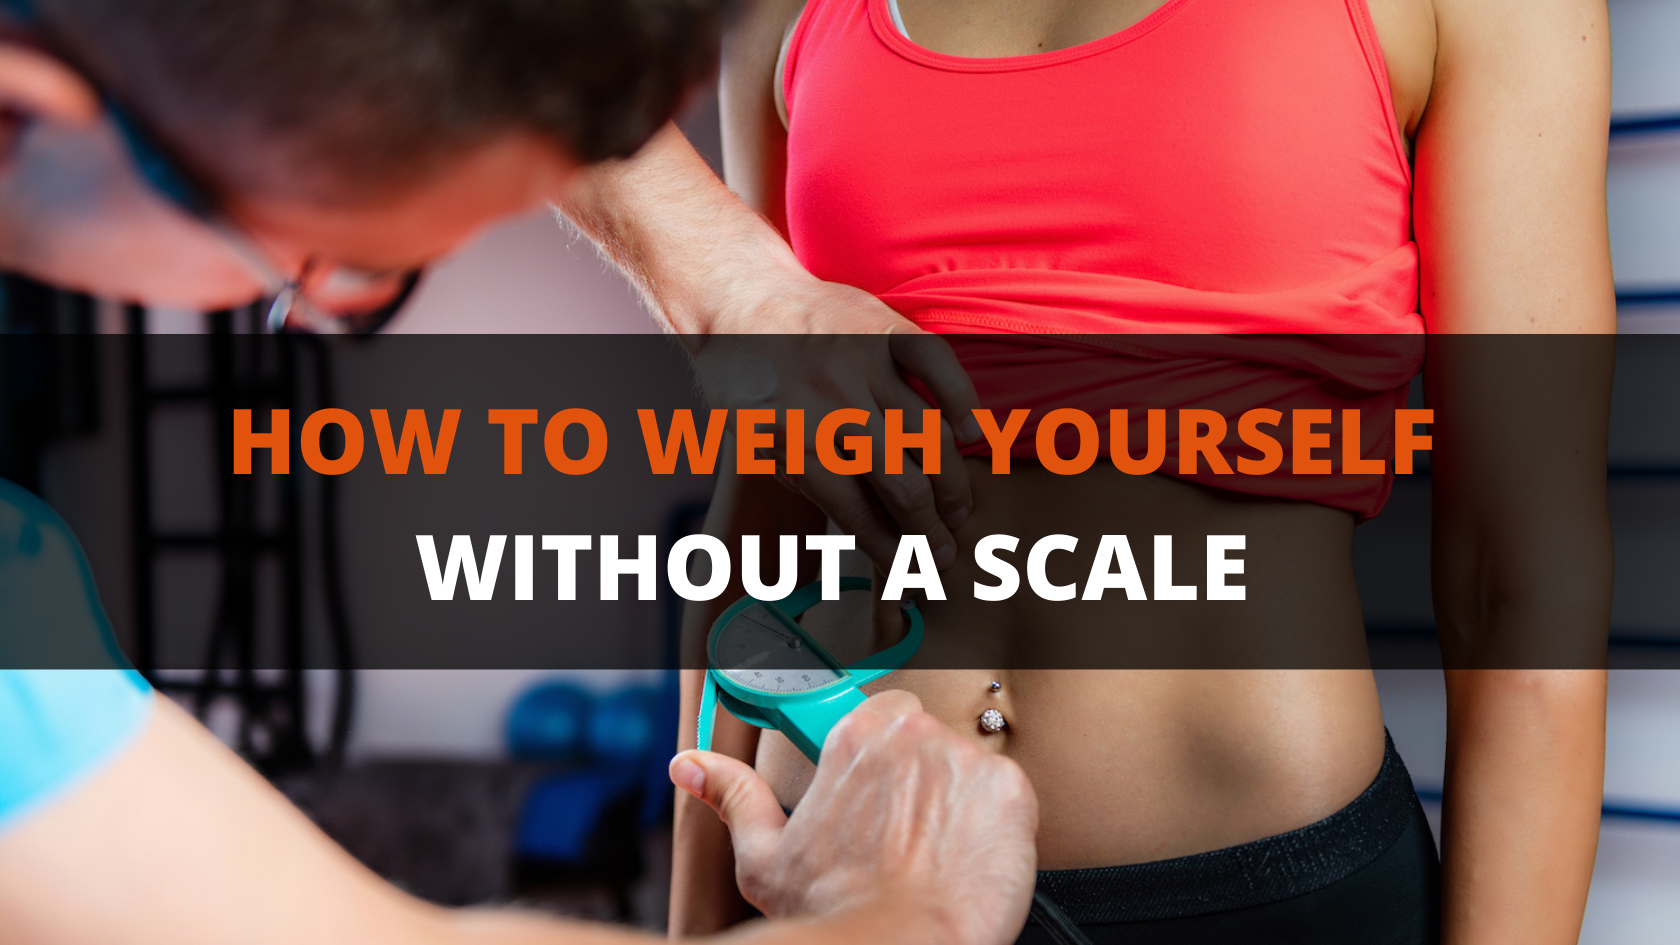 https://powerliftingtechnique.com/wp-content/uploads/2023/02/plt-how-to-weigh-yourself-without-a-scale.png